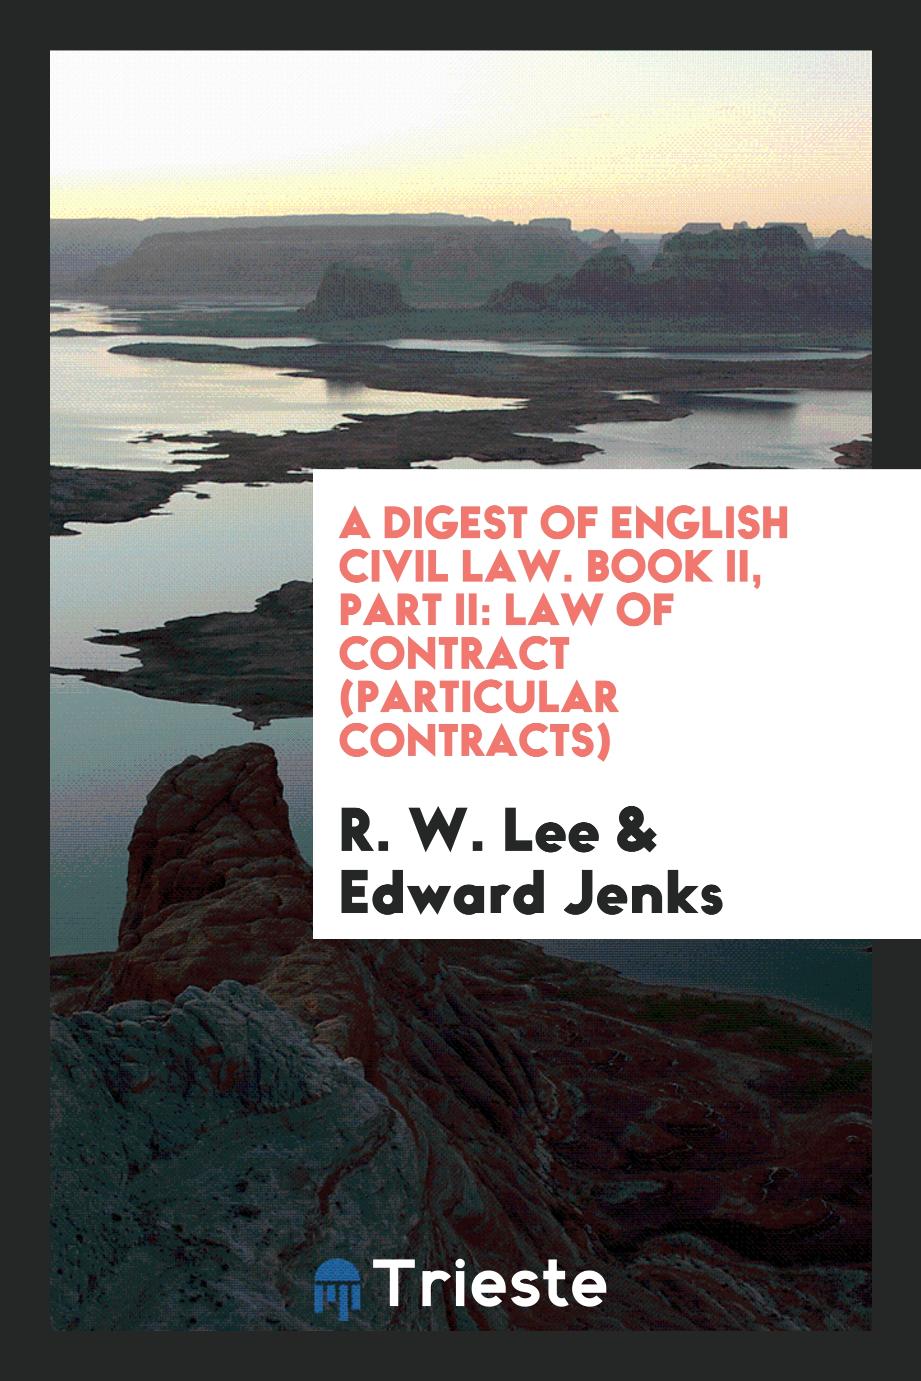 A Digest of English Civil Law. Book II, Part II: Law of Contract (Particular Contracts)